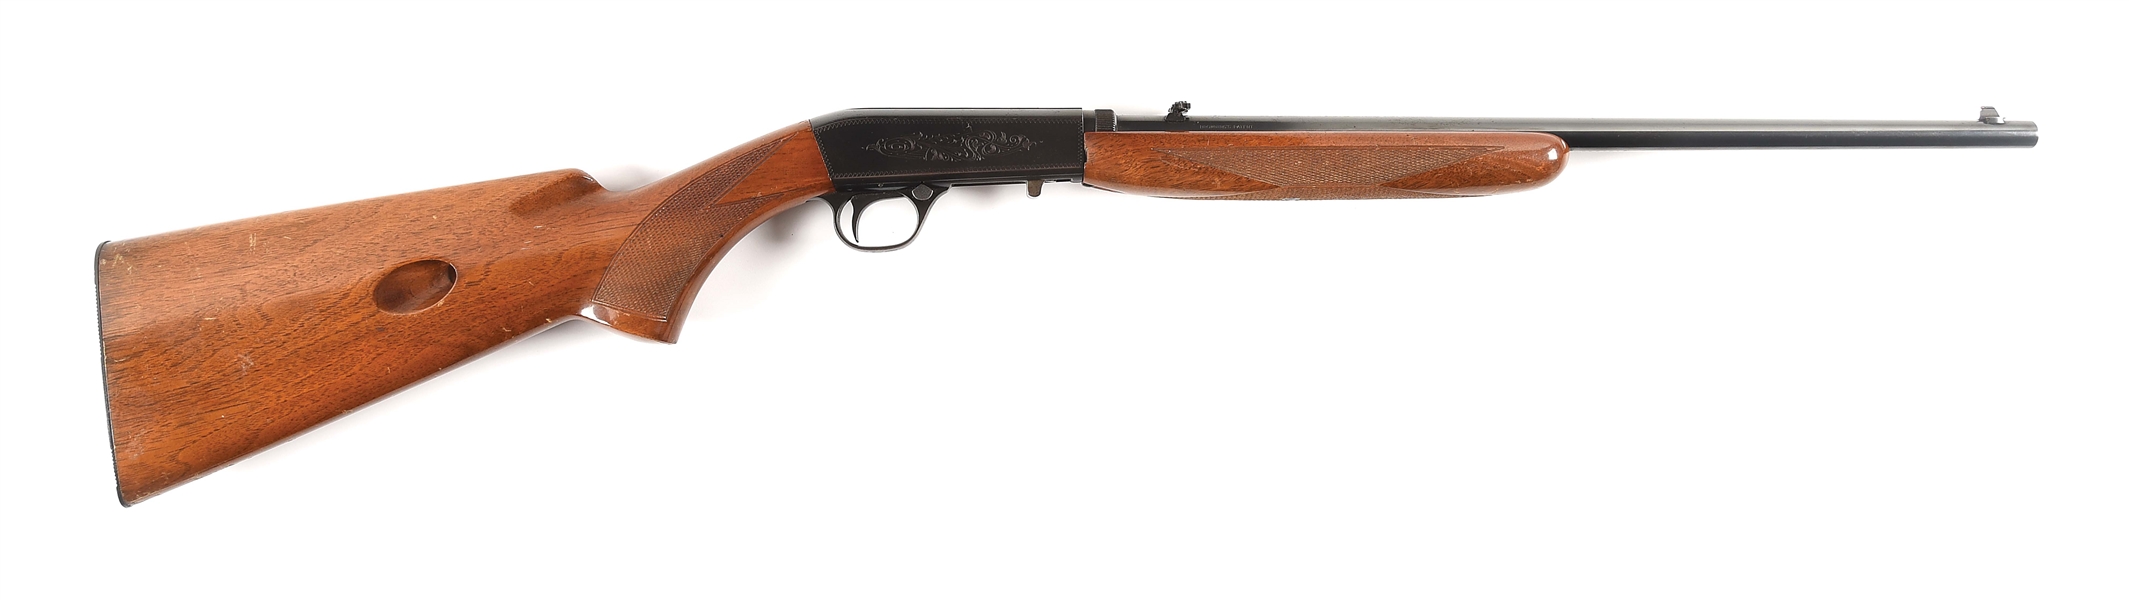 (C) BROWNING SA-22 GRADE I SEMI-AUTOMATIC RIFLE WITH FACTORY CASE AND SCOPE.